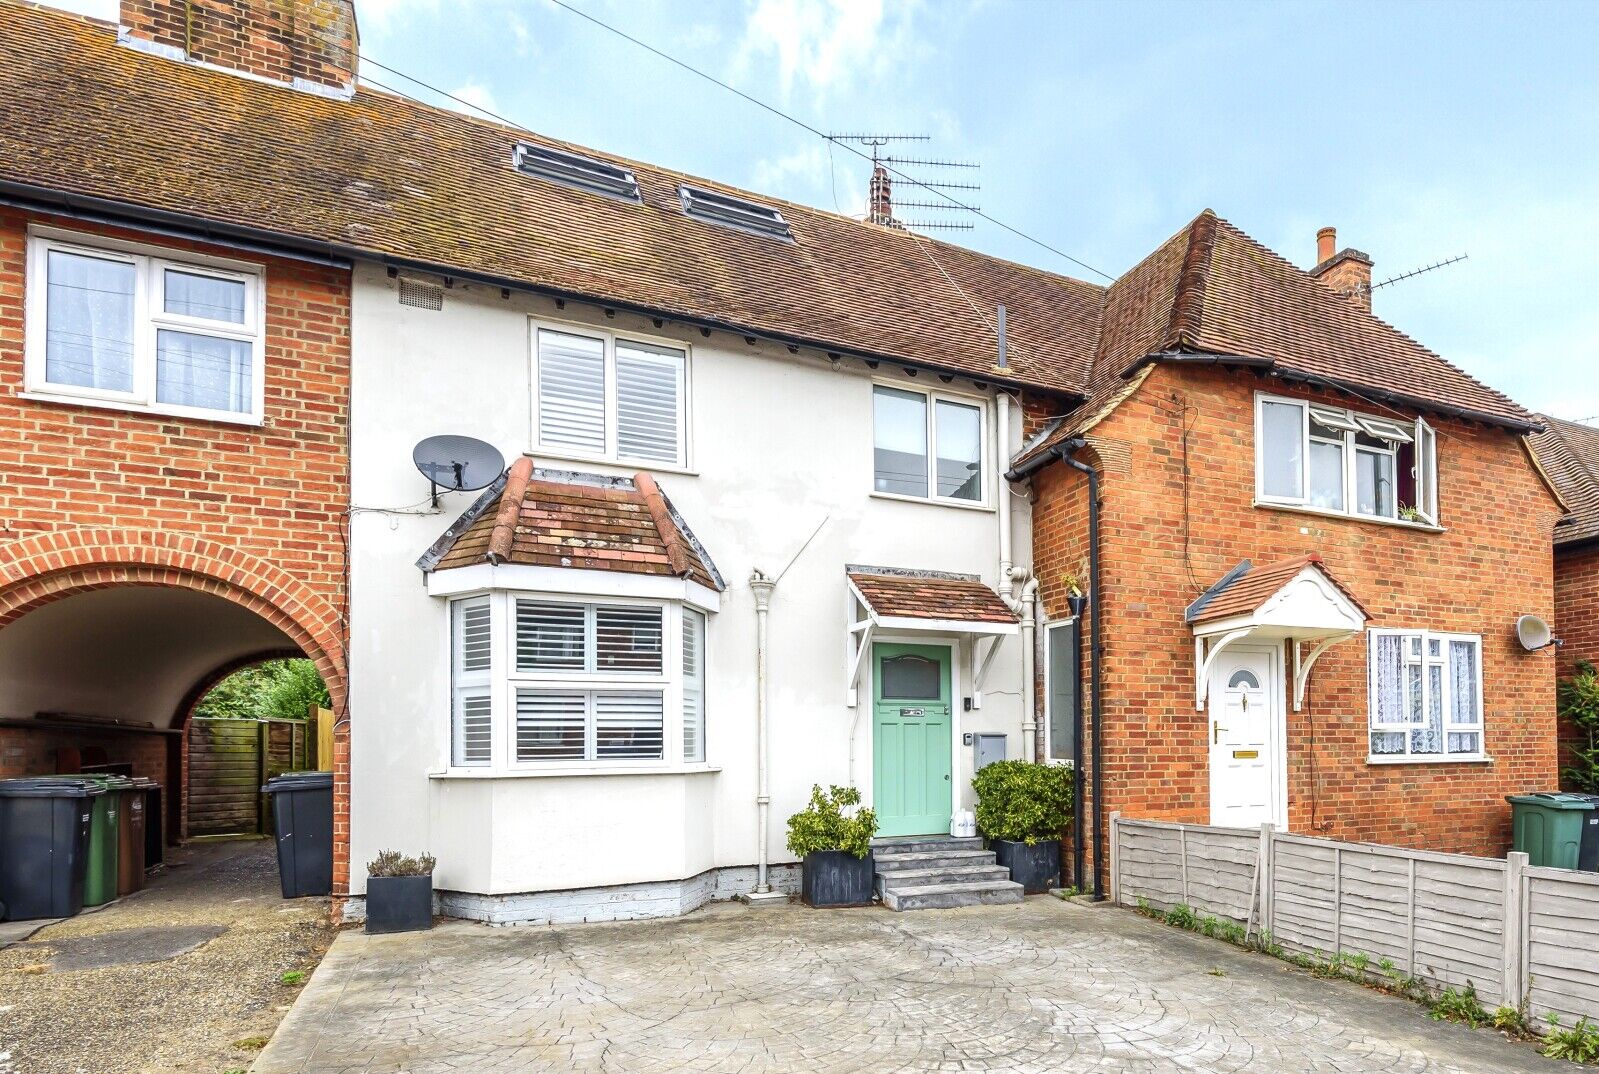 4 bedroom mid terraced house for sale Western Avenue, Henley-On-Thames, RG9, main image